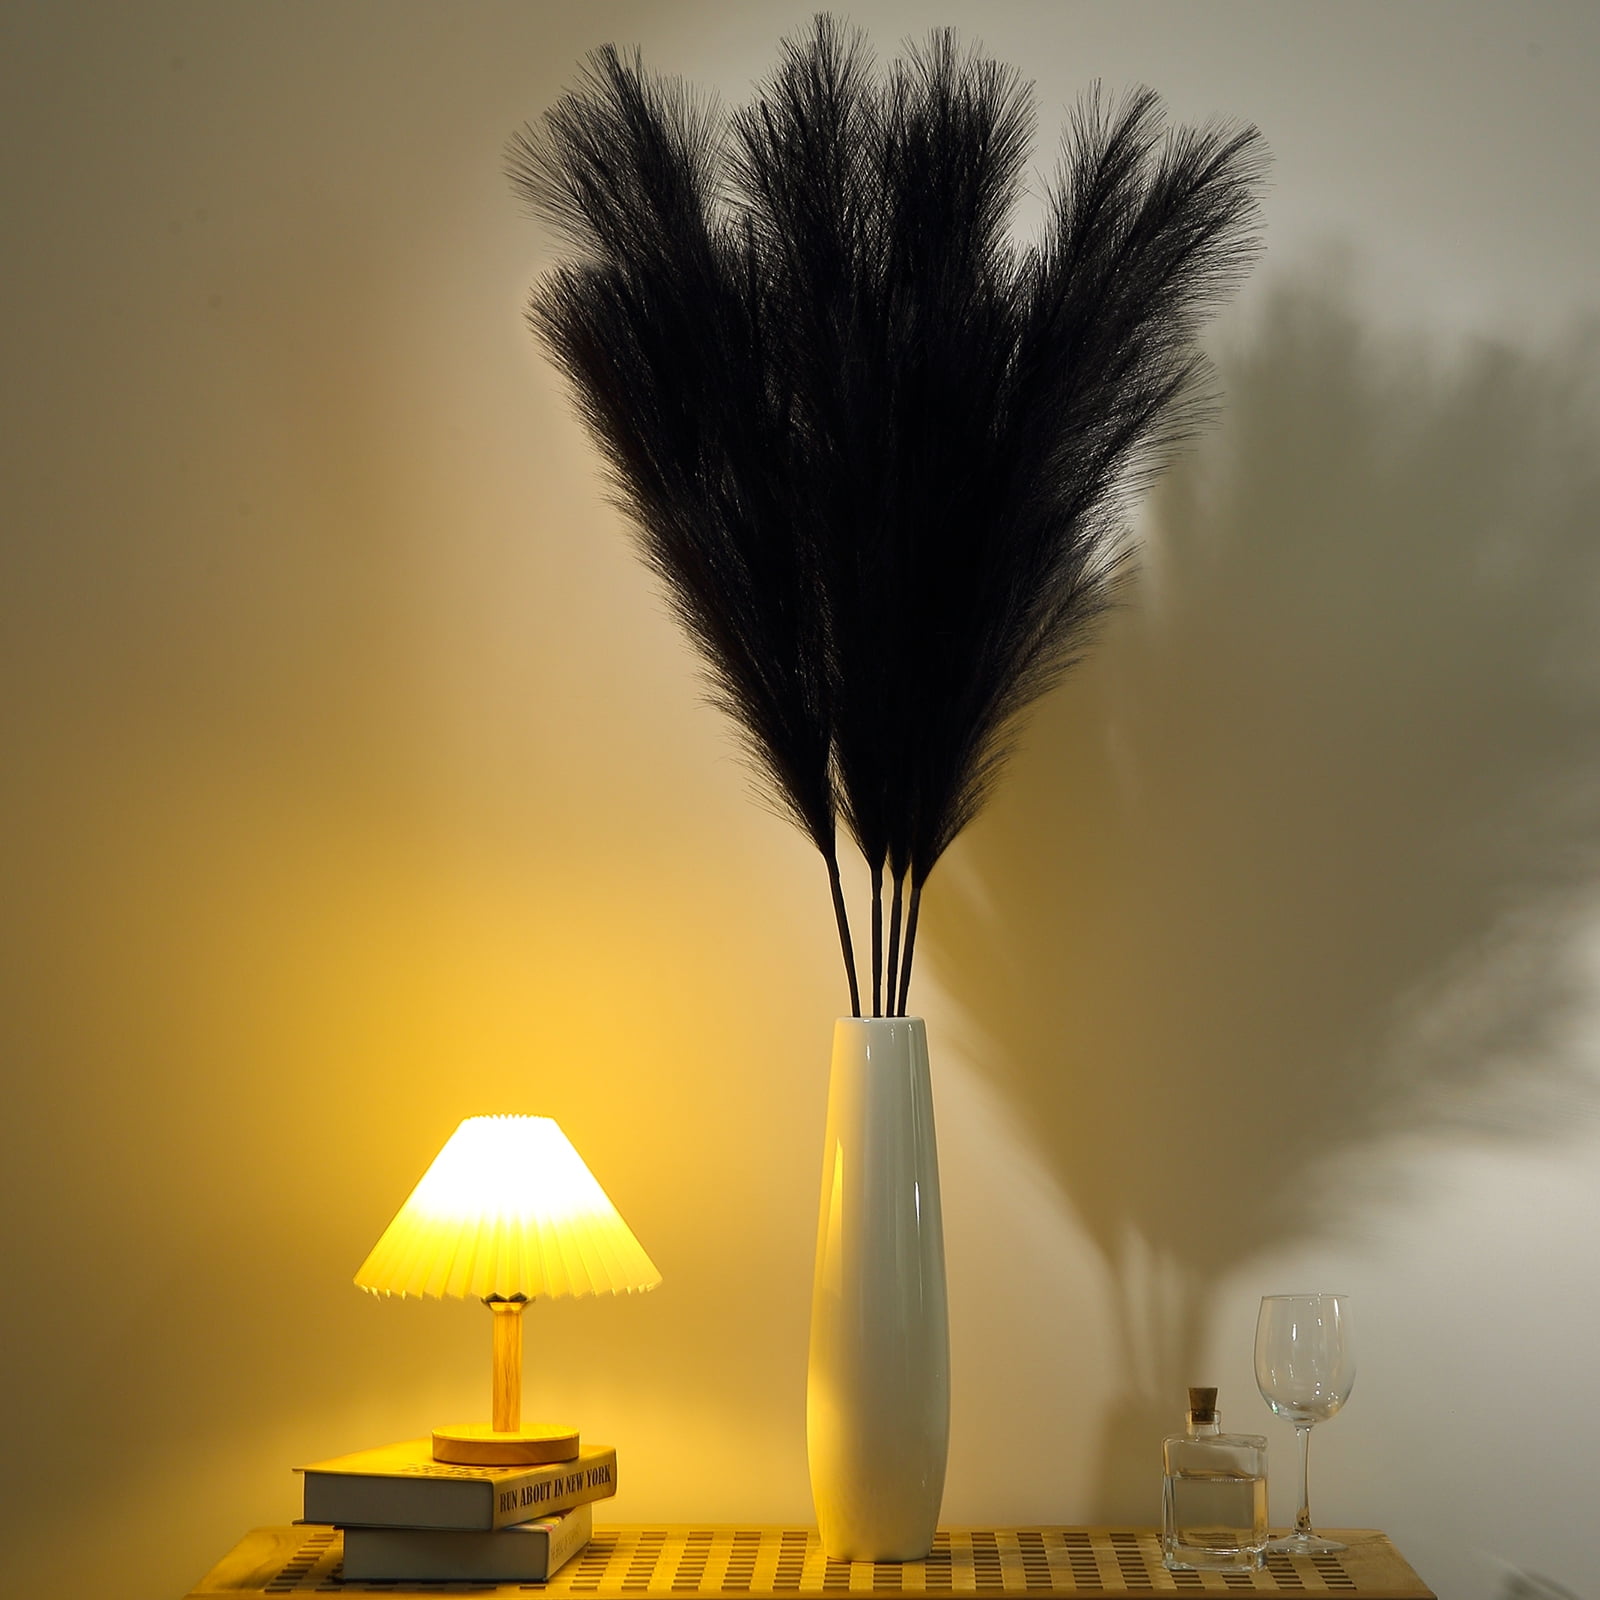 Lozidecor Tall Faux Pampas Grass Decor Tall 42 inch 5 Stems I Fluffy  Artificial Black Pampas Grass Tall for Floor Vase, Large Pompas Grass  Branches